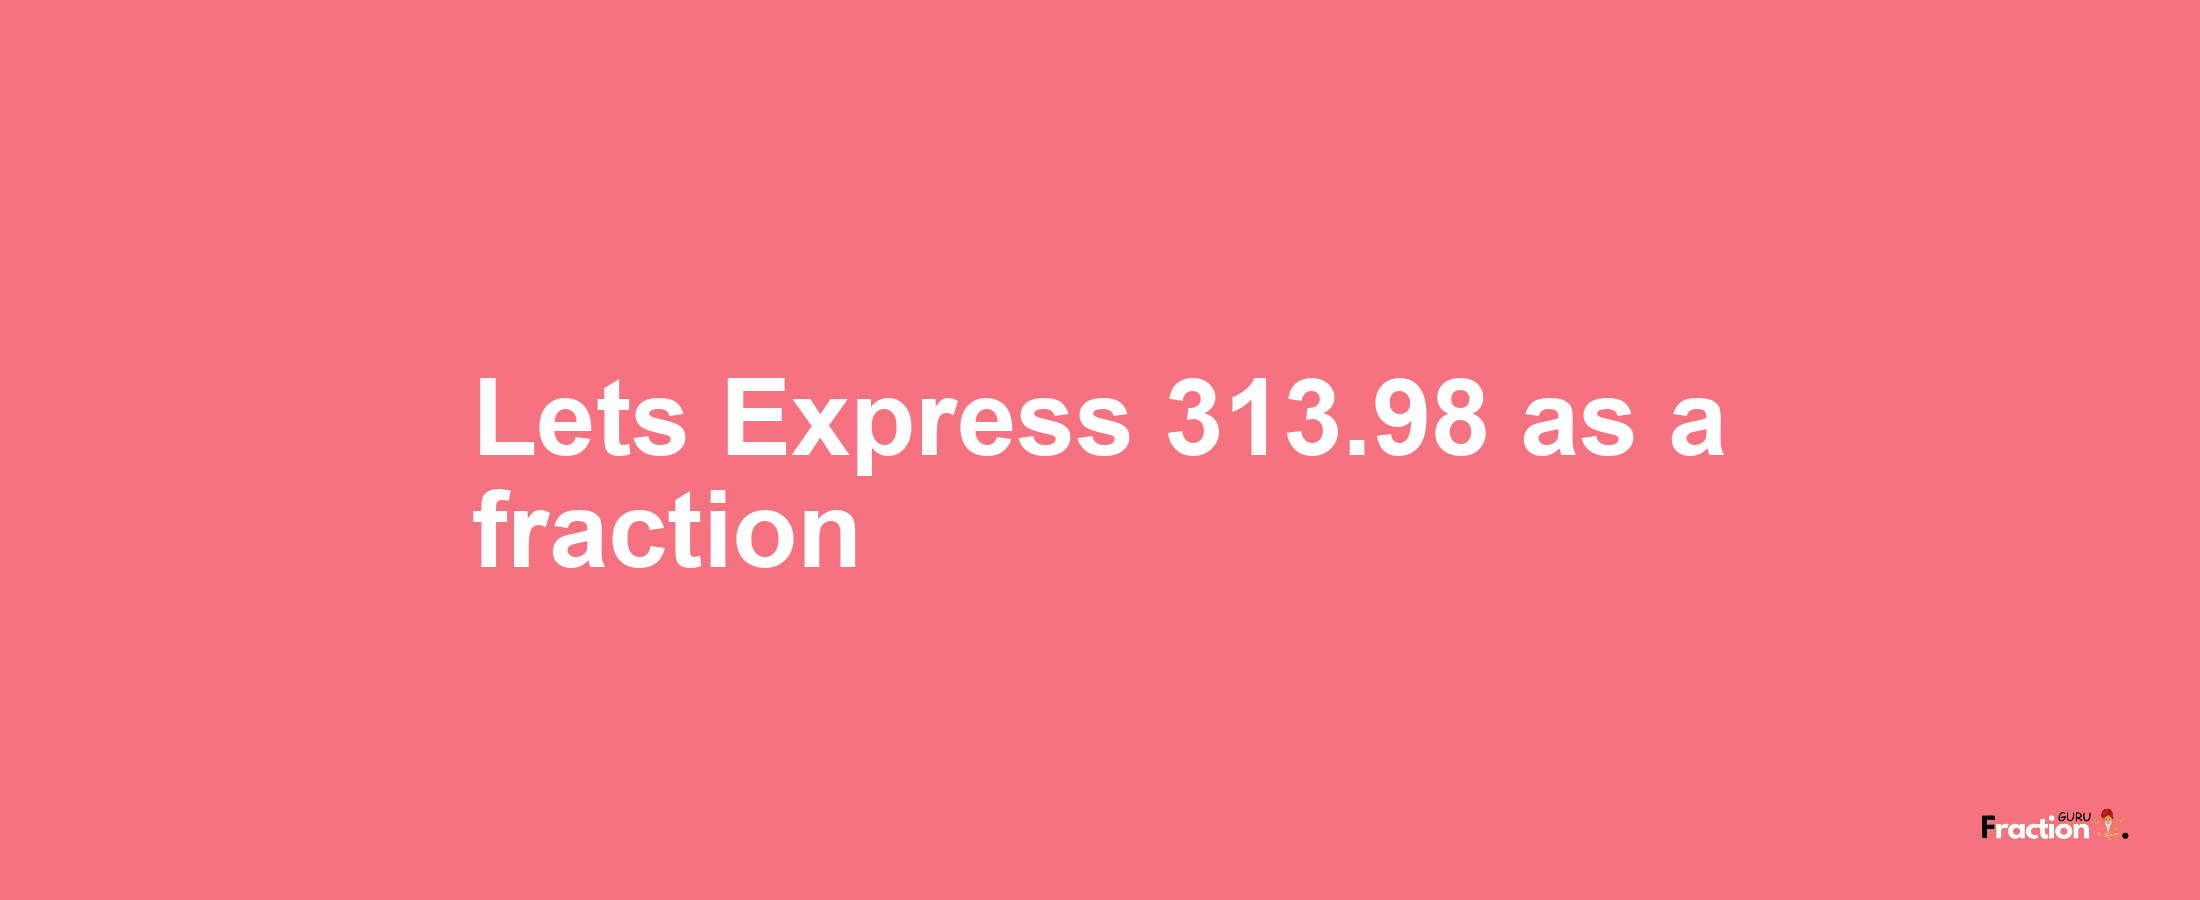 Lets Express 313.98 as afraction